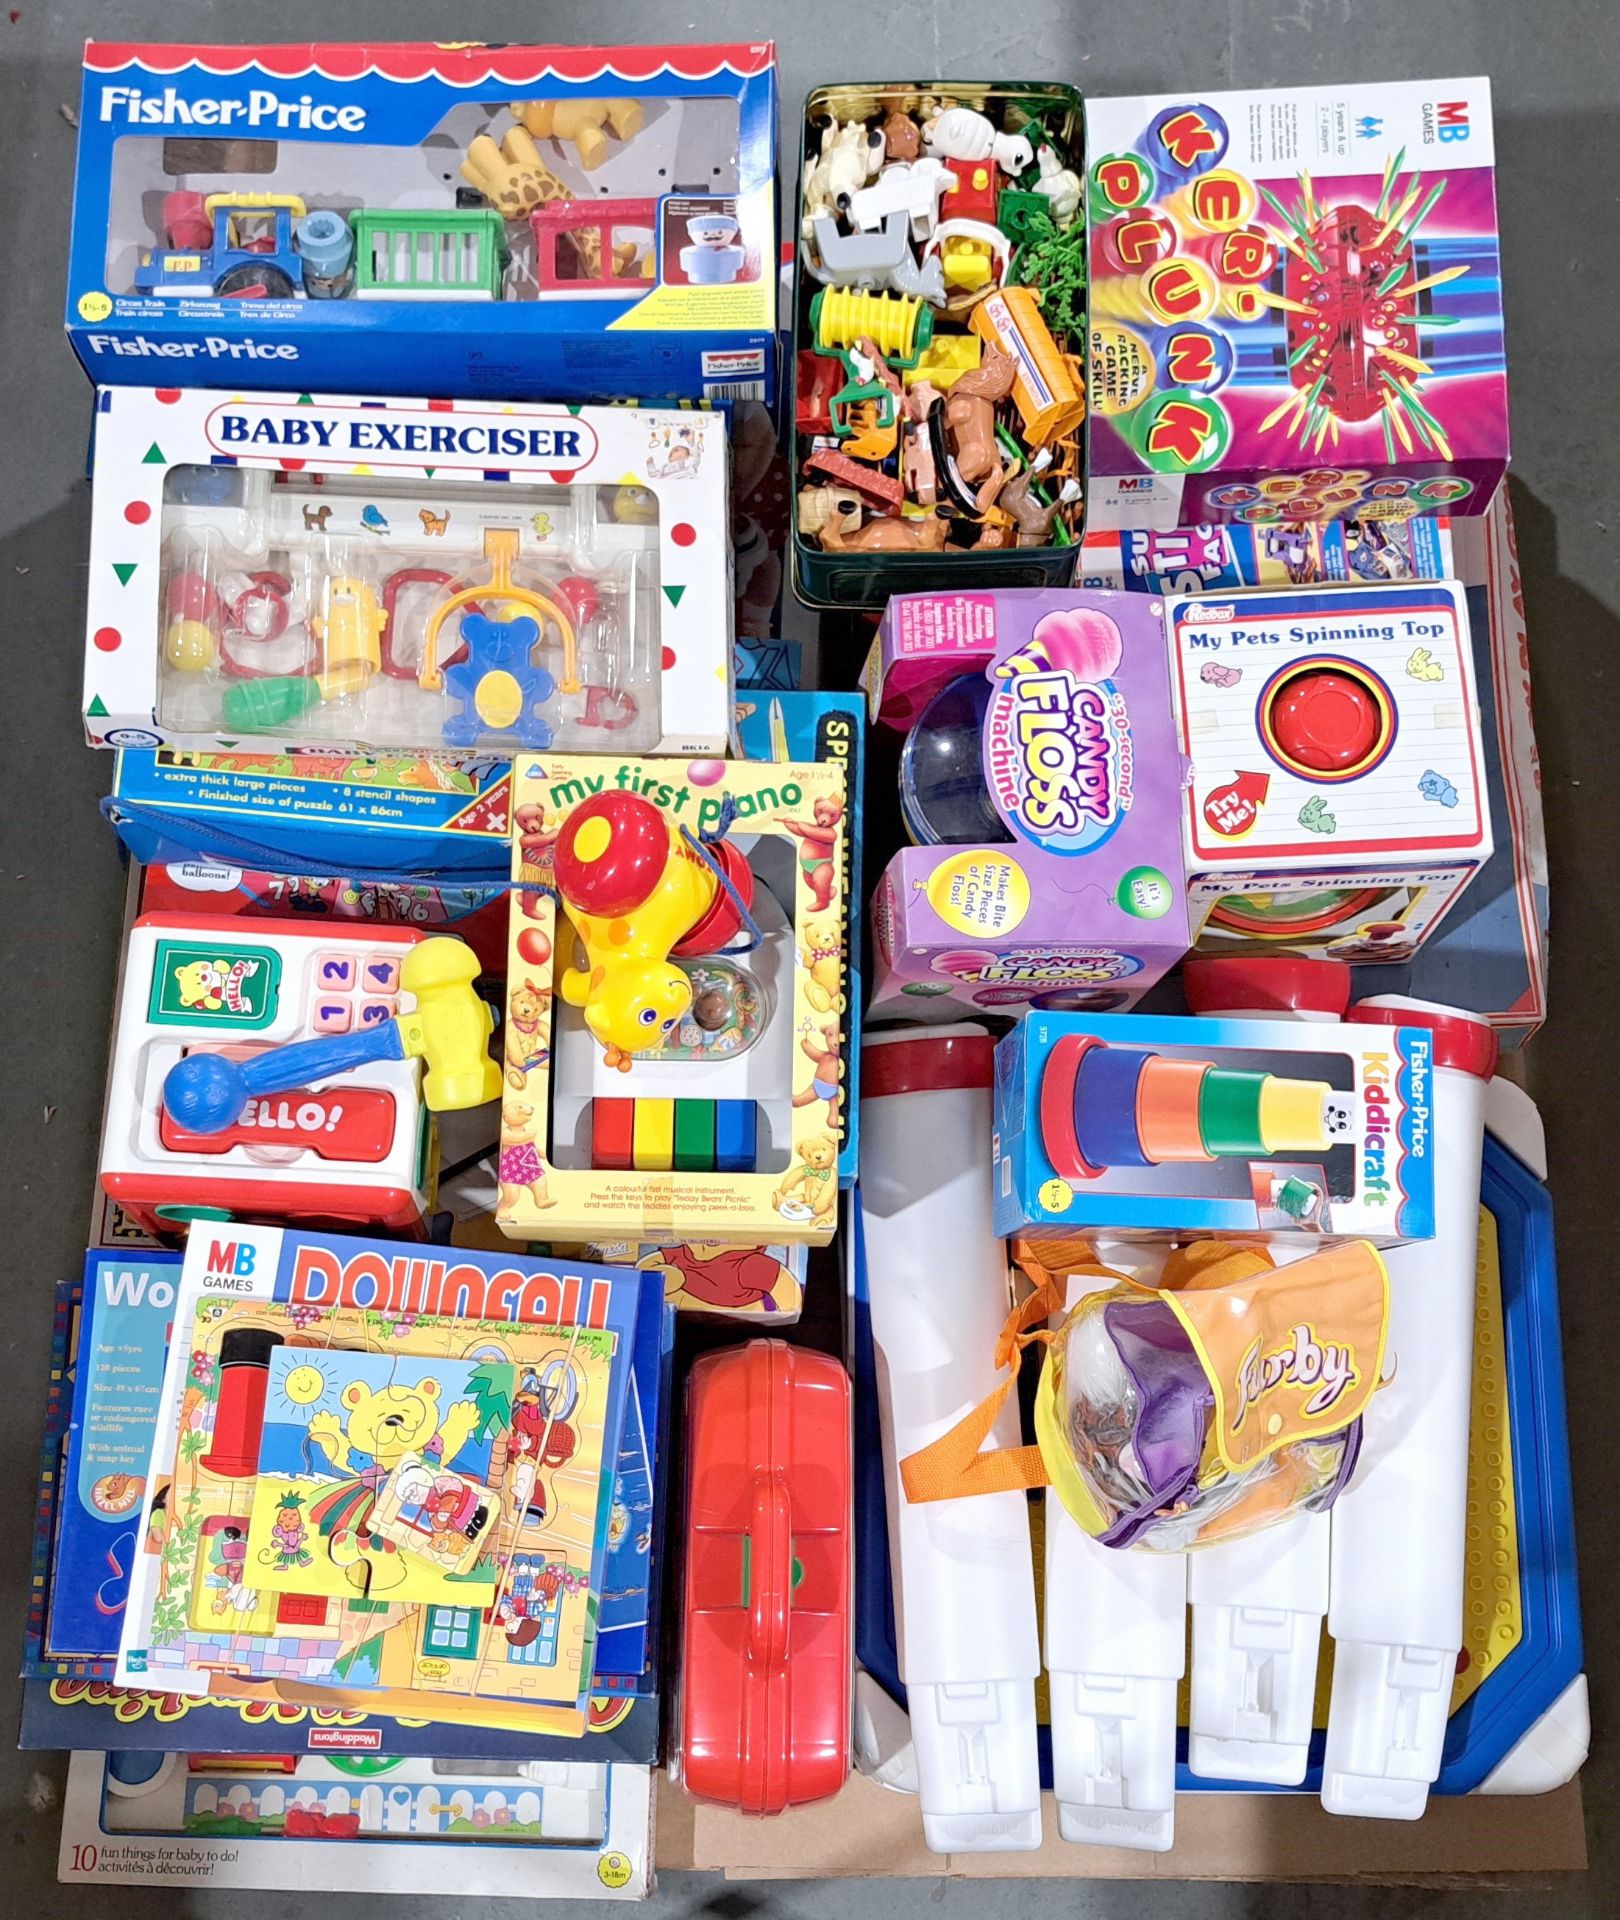 Large quantity of Fisher Price toys, board games & similar